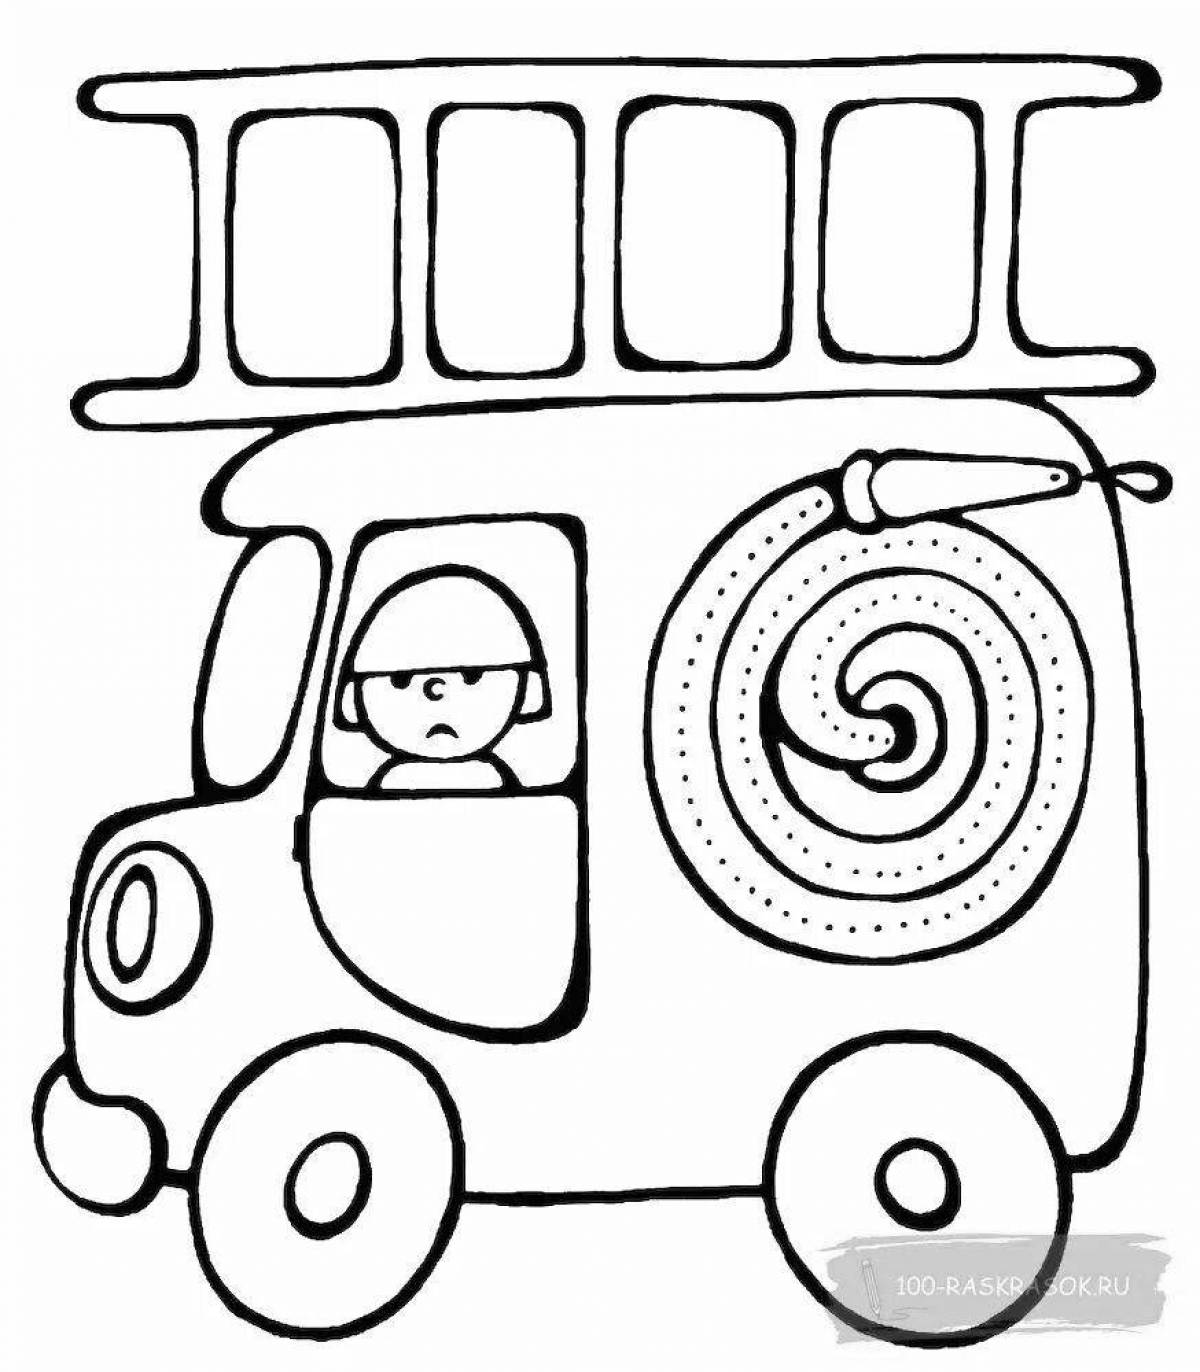 Adorable fire truck coloring book for 2-3 year olds